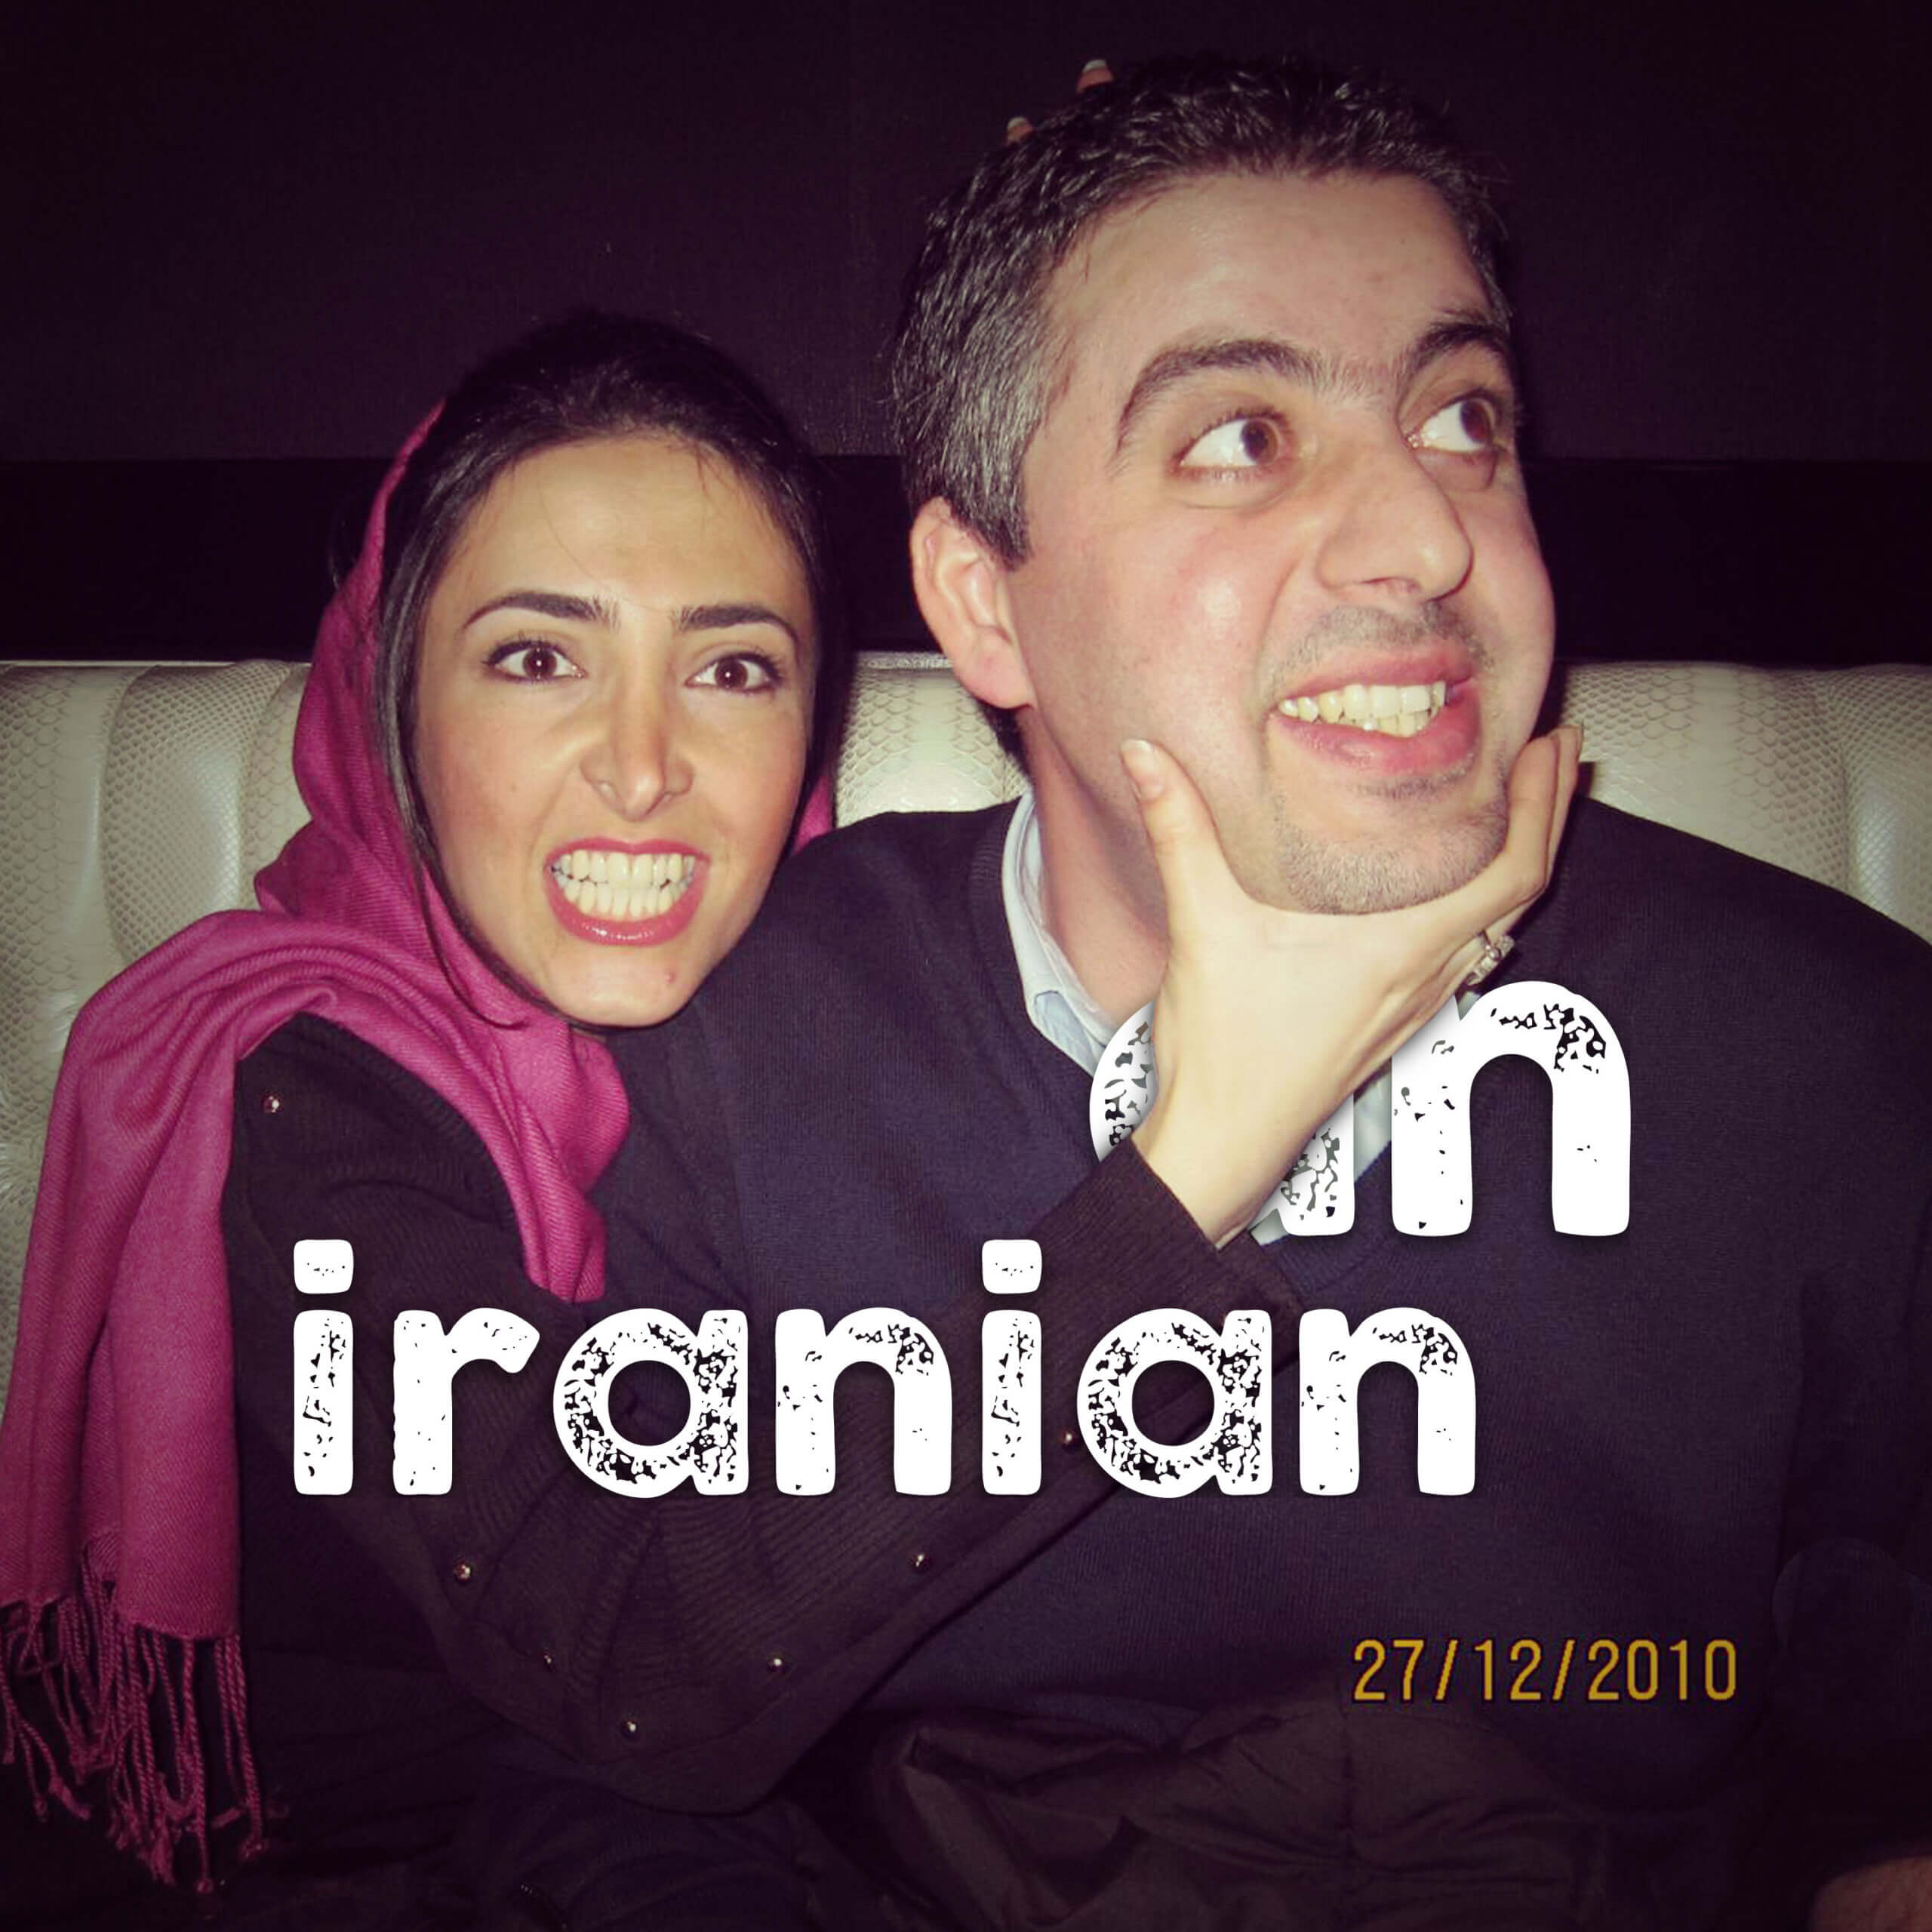 How do I propose to an Iranian girl?